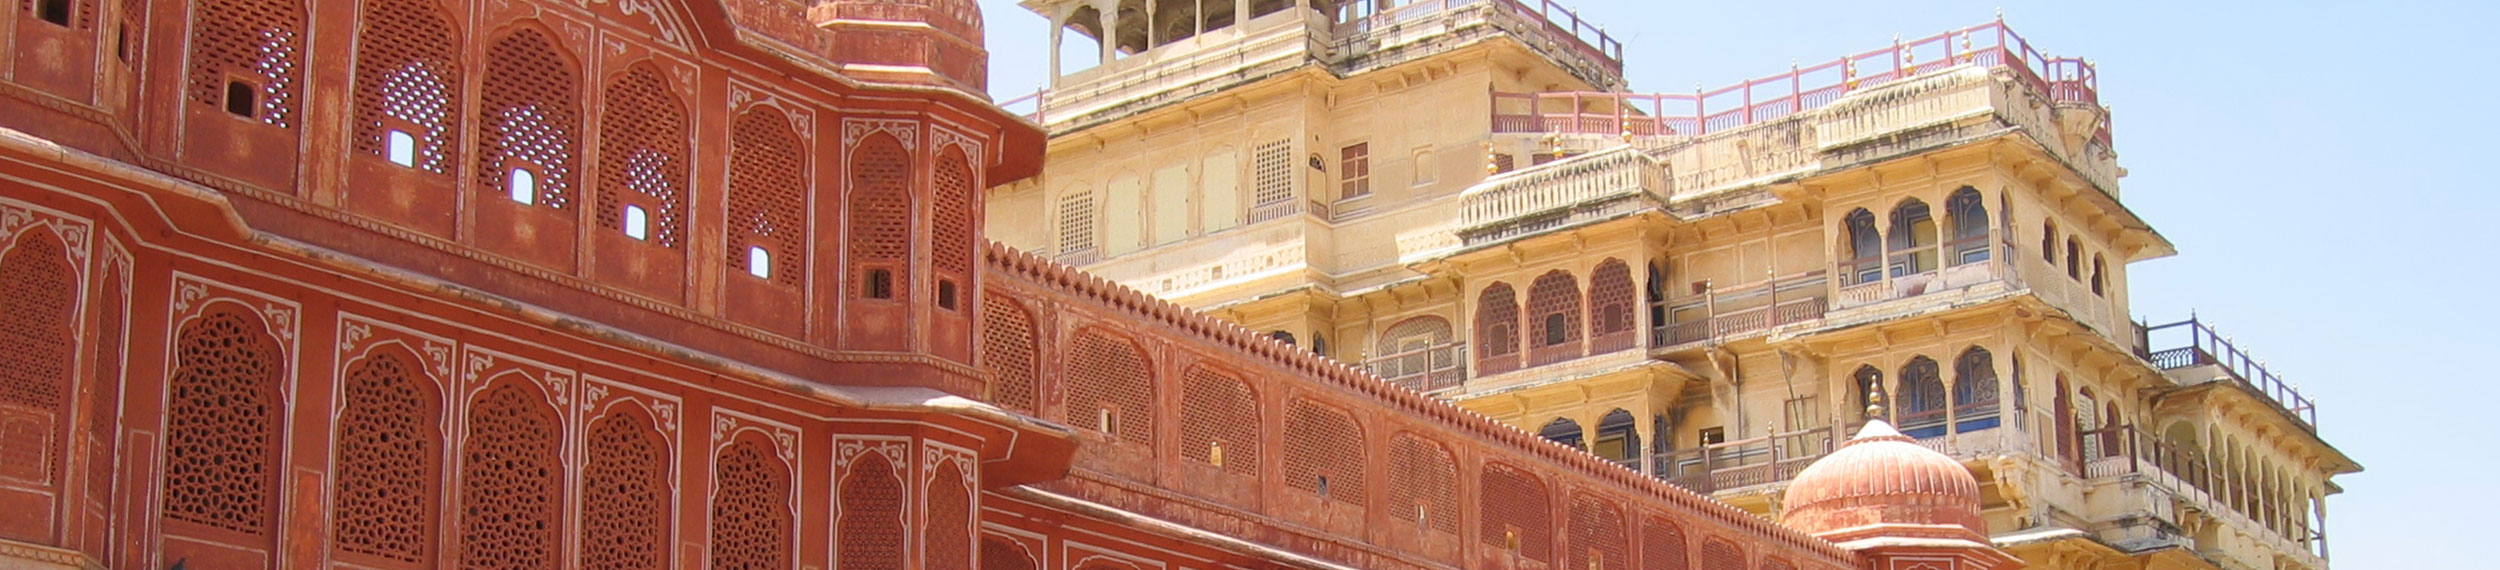 The Pink Palace in Jaipur, India, on a bright, sun shiny day.